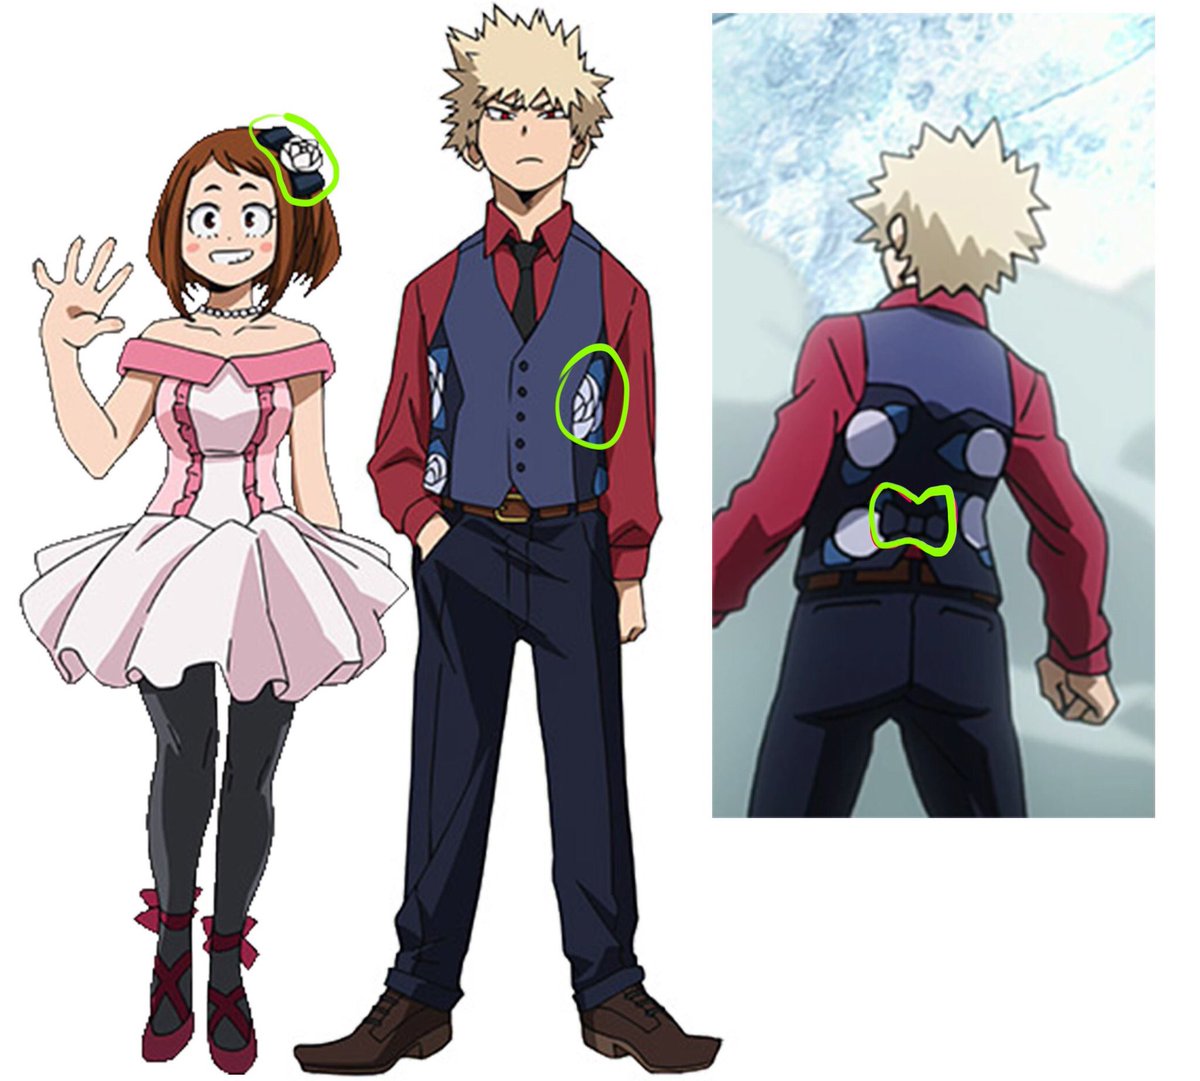 Once again snatched off twitter, thank you Kacchako fandom 